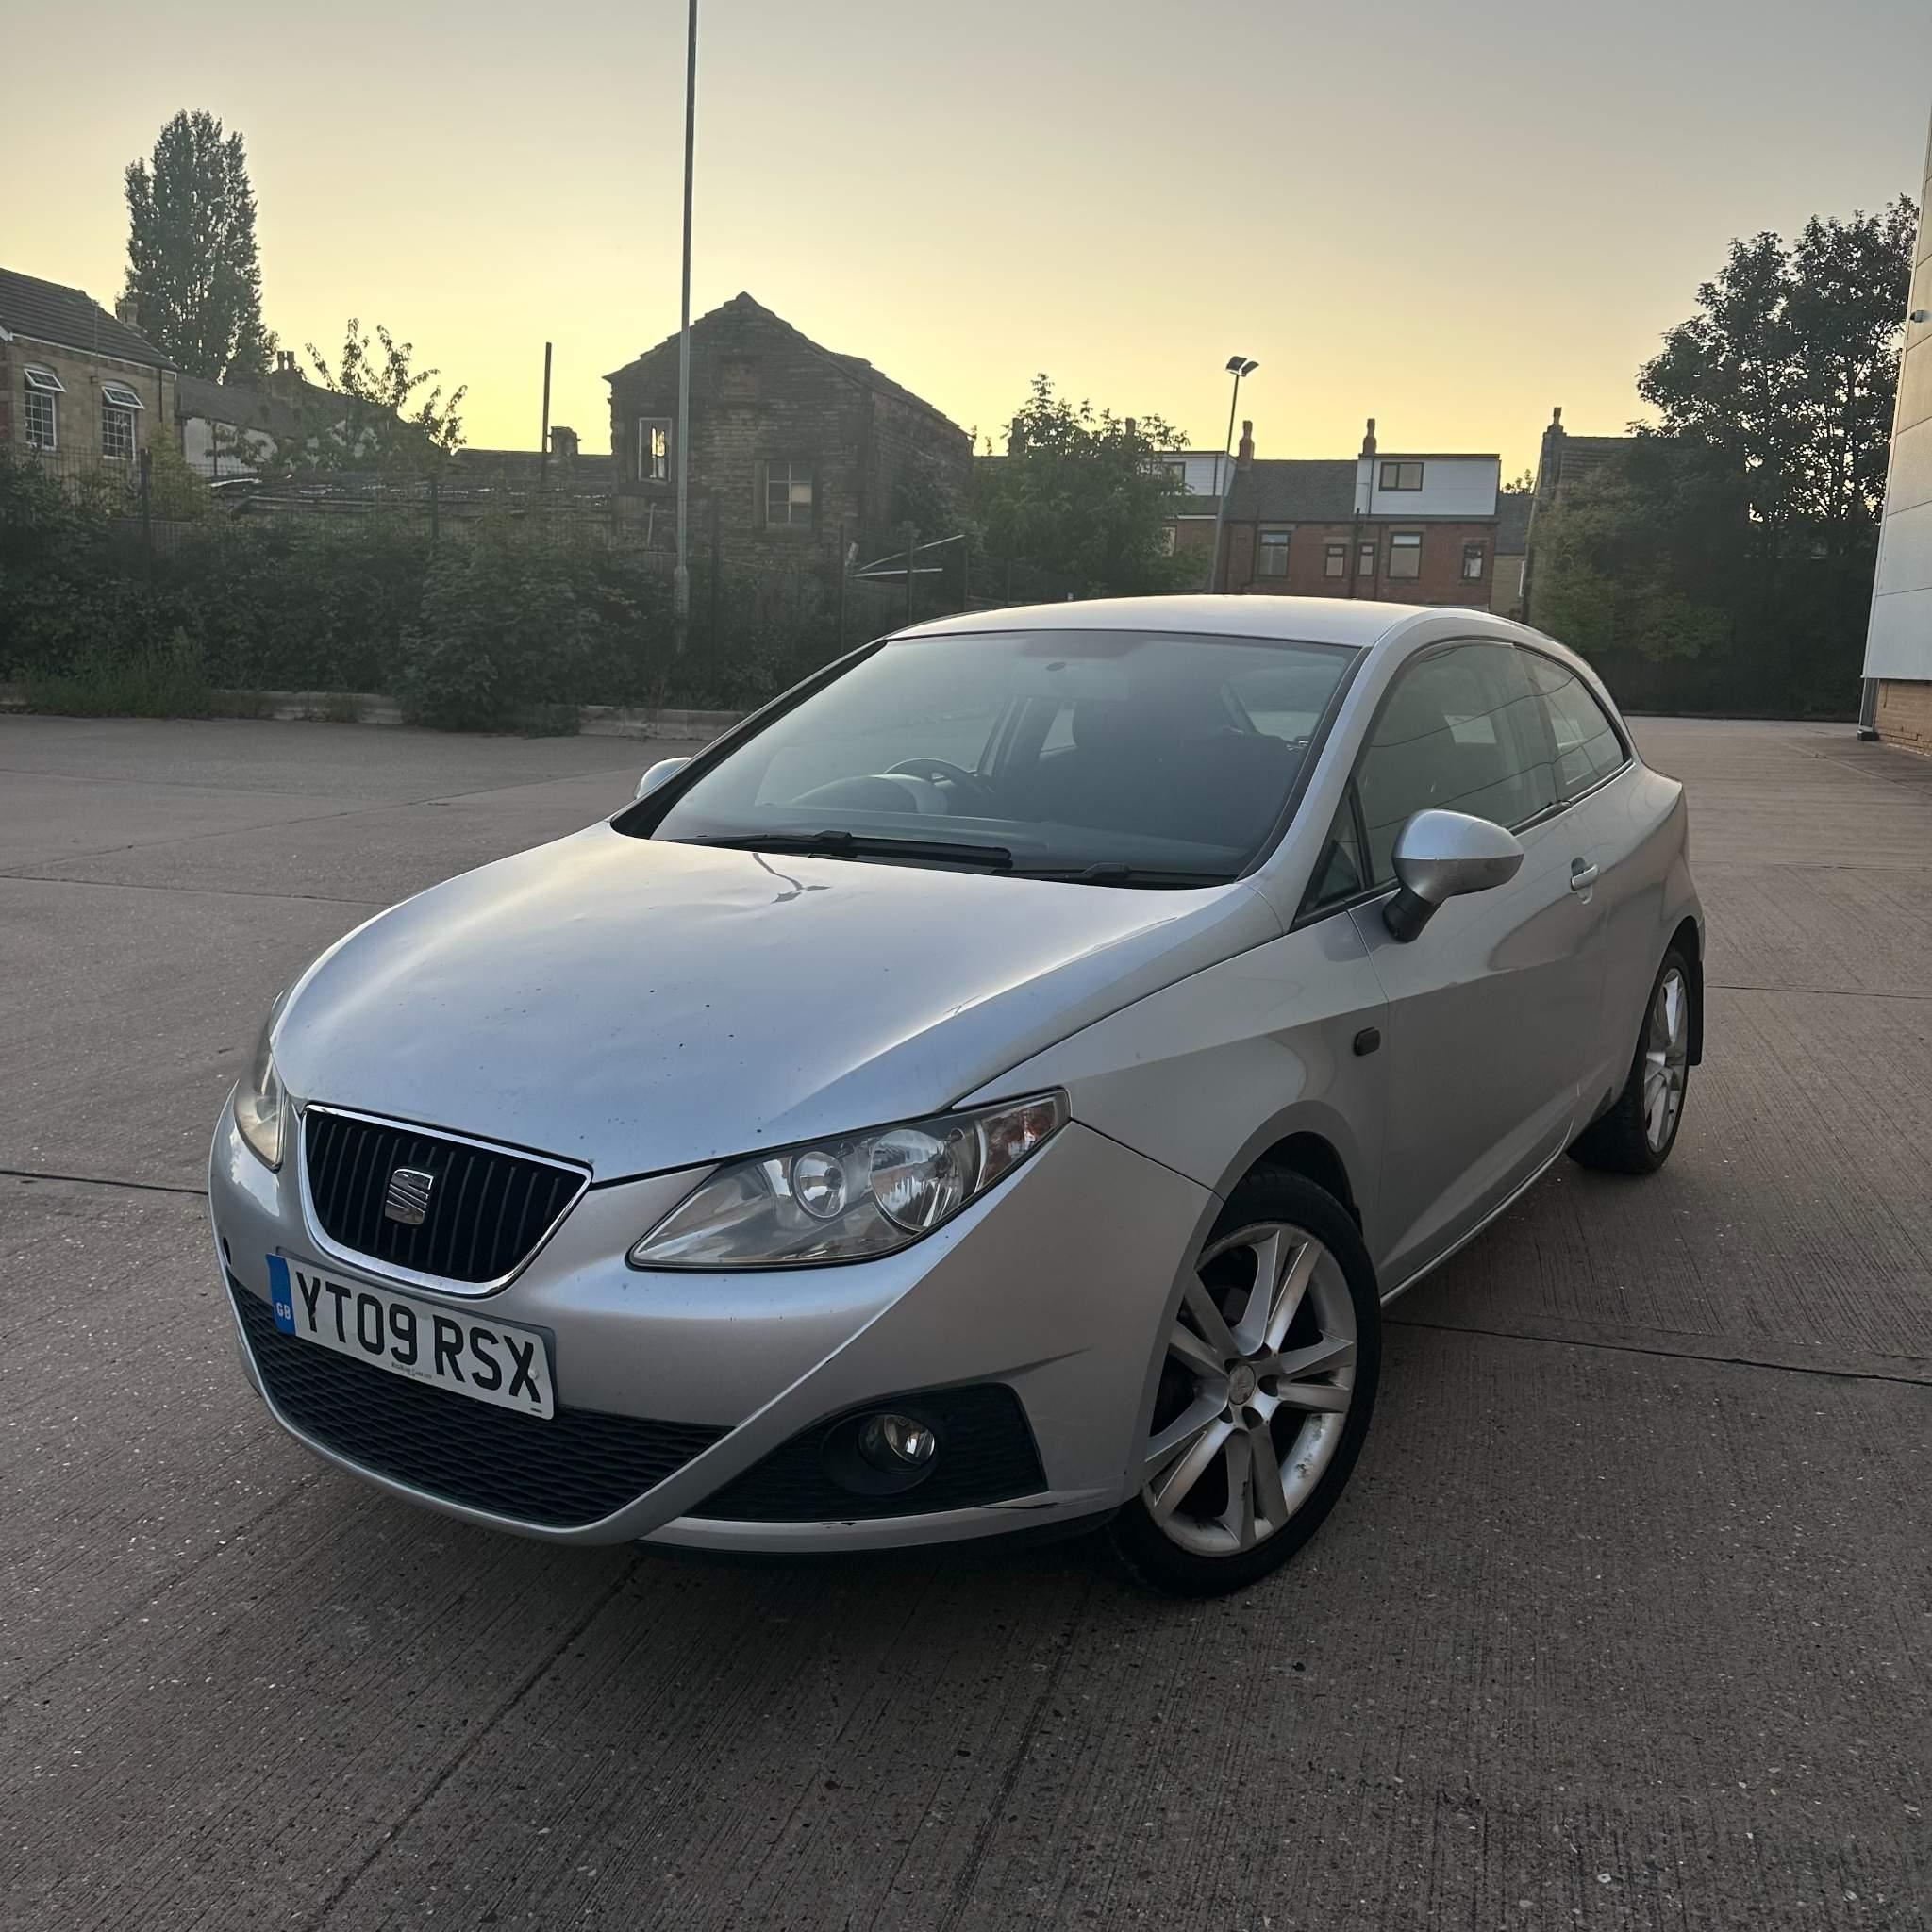 Used Seat Ibiza - 2008-2017 Reliability & Common Problems | What Car?